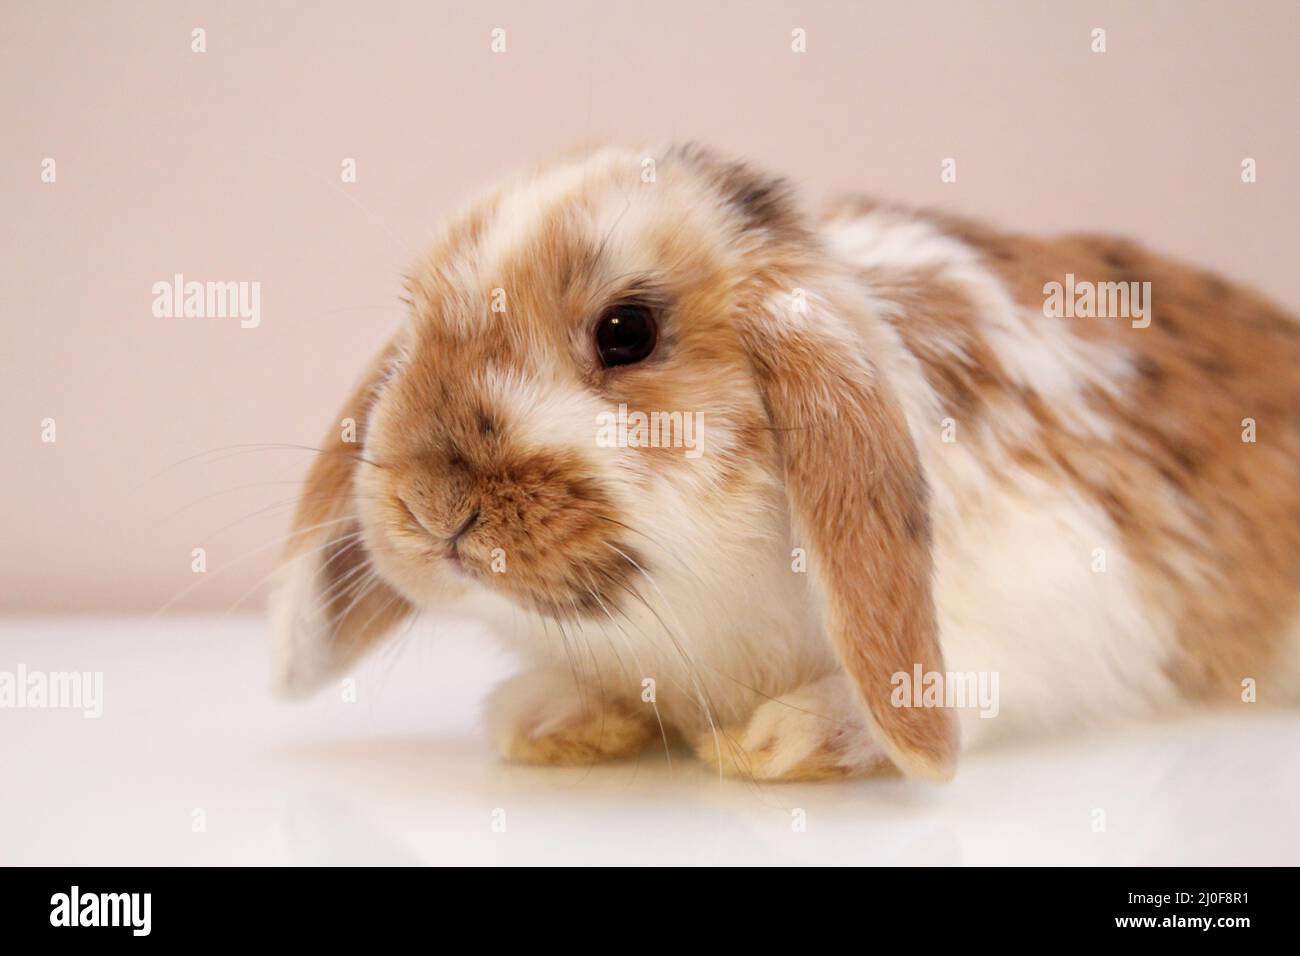 Photo shoot with a young dwarf rabbit Stock Photo